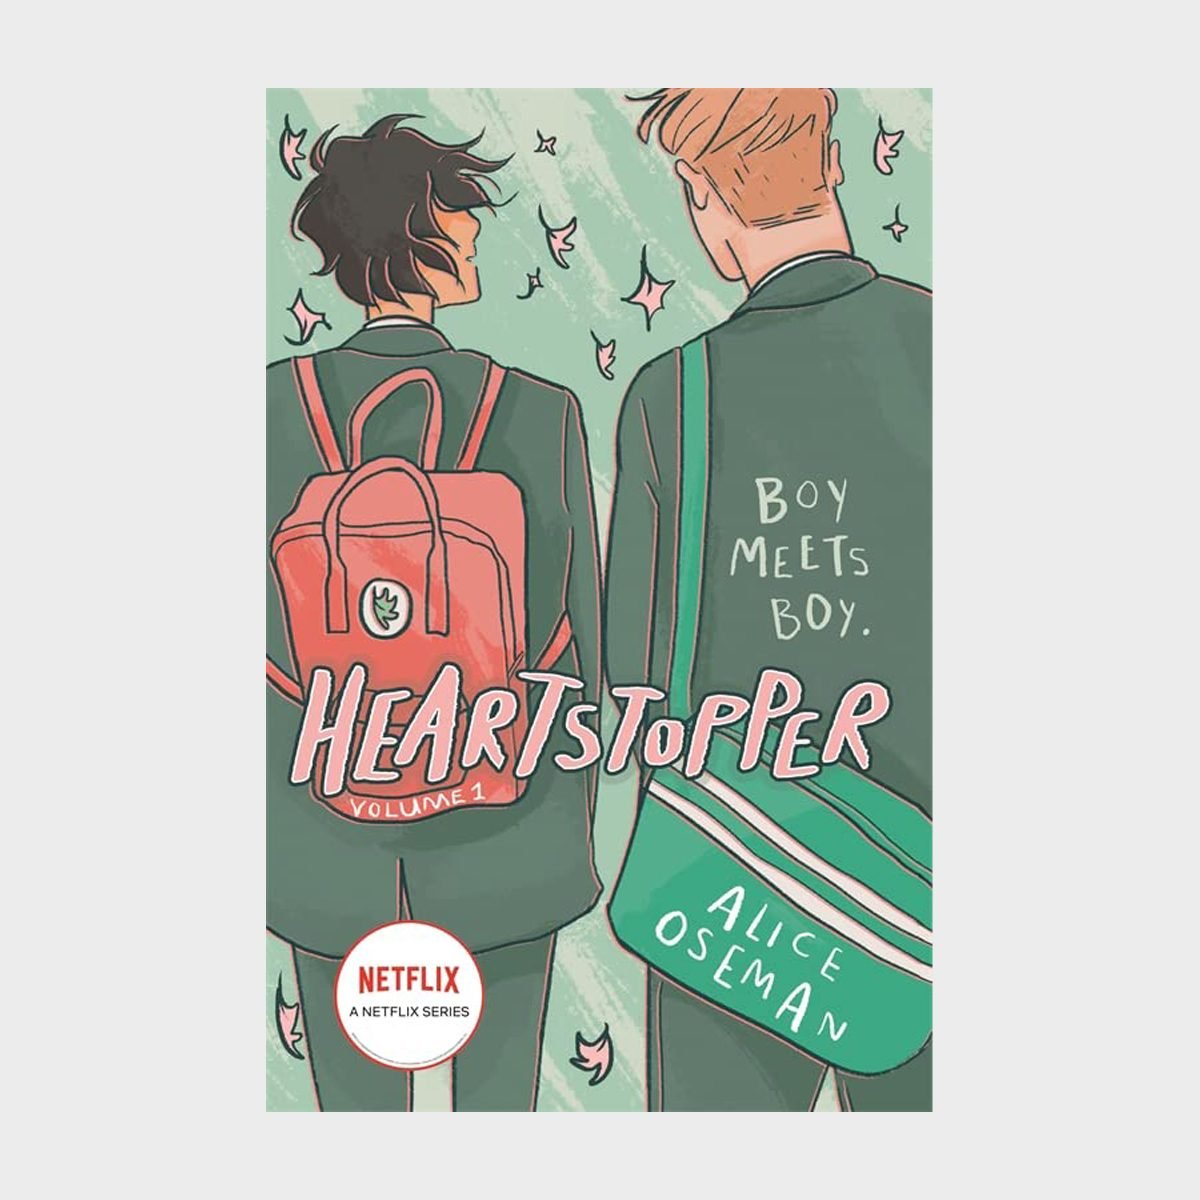 <p class=""><strong>Series starter: </strong><a href="https://www.amazon.com/Heartstopper-One-Alice-Oseman/dp/1444951386/" rel="noopener noreferrer"><em>Heartstopper Vol. 1</em></a></p> <p class=""><strong>What you're in for: </strong>A wholesome <a href="https://www.rd.com/list/best-books-for-teens/" rel="noopener noreferrer">YA graphic novel</a> filled with the heart-pounding exploration of falling in love for the first time</p> <p>If you're looking for <a href="https://www.rd.com/list/feel-good-books/" rel="noopener noreferrer">feel-good books</a>, look no further than Alice Oseman's <em>Heartstopper</em> graphic novels. This sweet YA romance book series follows shy, sensitive Charlie and amiable, rugby-loving Nick. The two boys navigate high school friendships, bullies and family, all while discovering a hint of a spark that's growing between them. The problem? Charlie is out, but Nick is still discovering his sexuality. Oseman has written four books in her <em>Heartstopper</em> book series, and the first was adapted into a hit Netflix TV series.</p> <p class="listicle-page__cta-button-shop"><a class="shop-btn" href="https://www.amazon.com/Heartstopper-One-Alice-Oseman/dp/1444951386/">Shop Now</a></p>